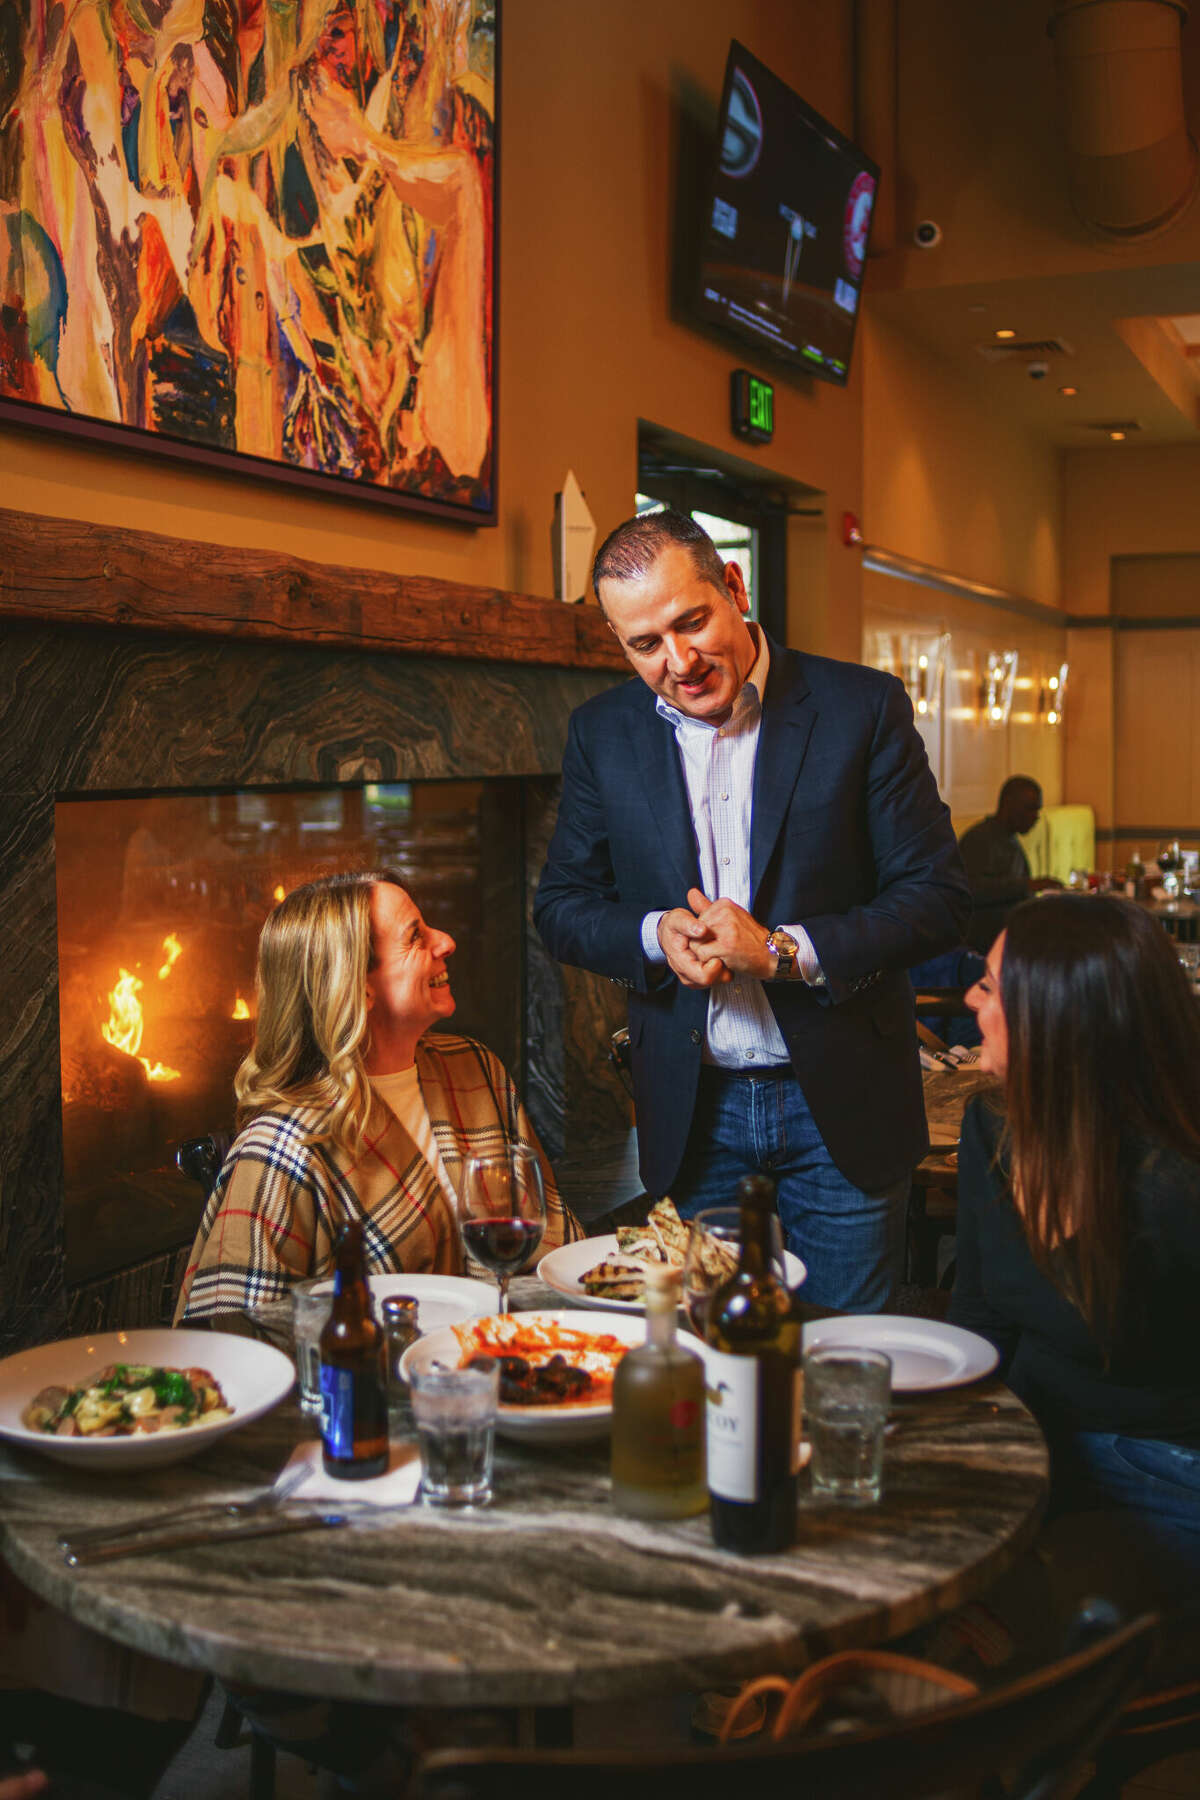 a host speaks with two women having dinner in front of a roaring fireplace